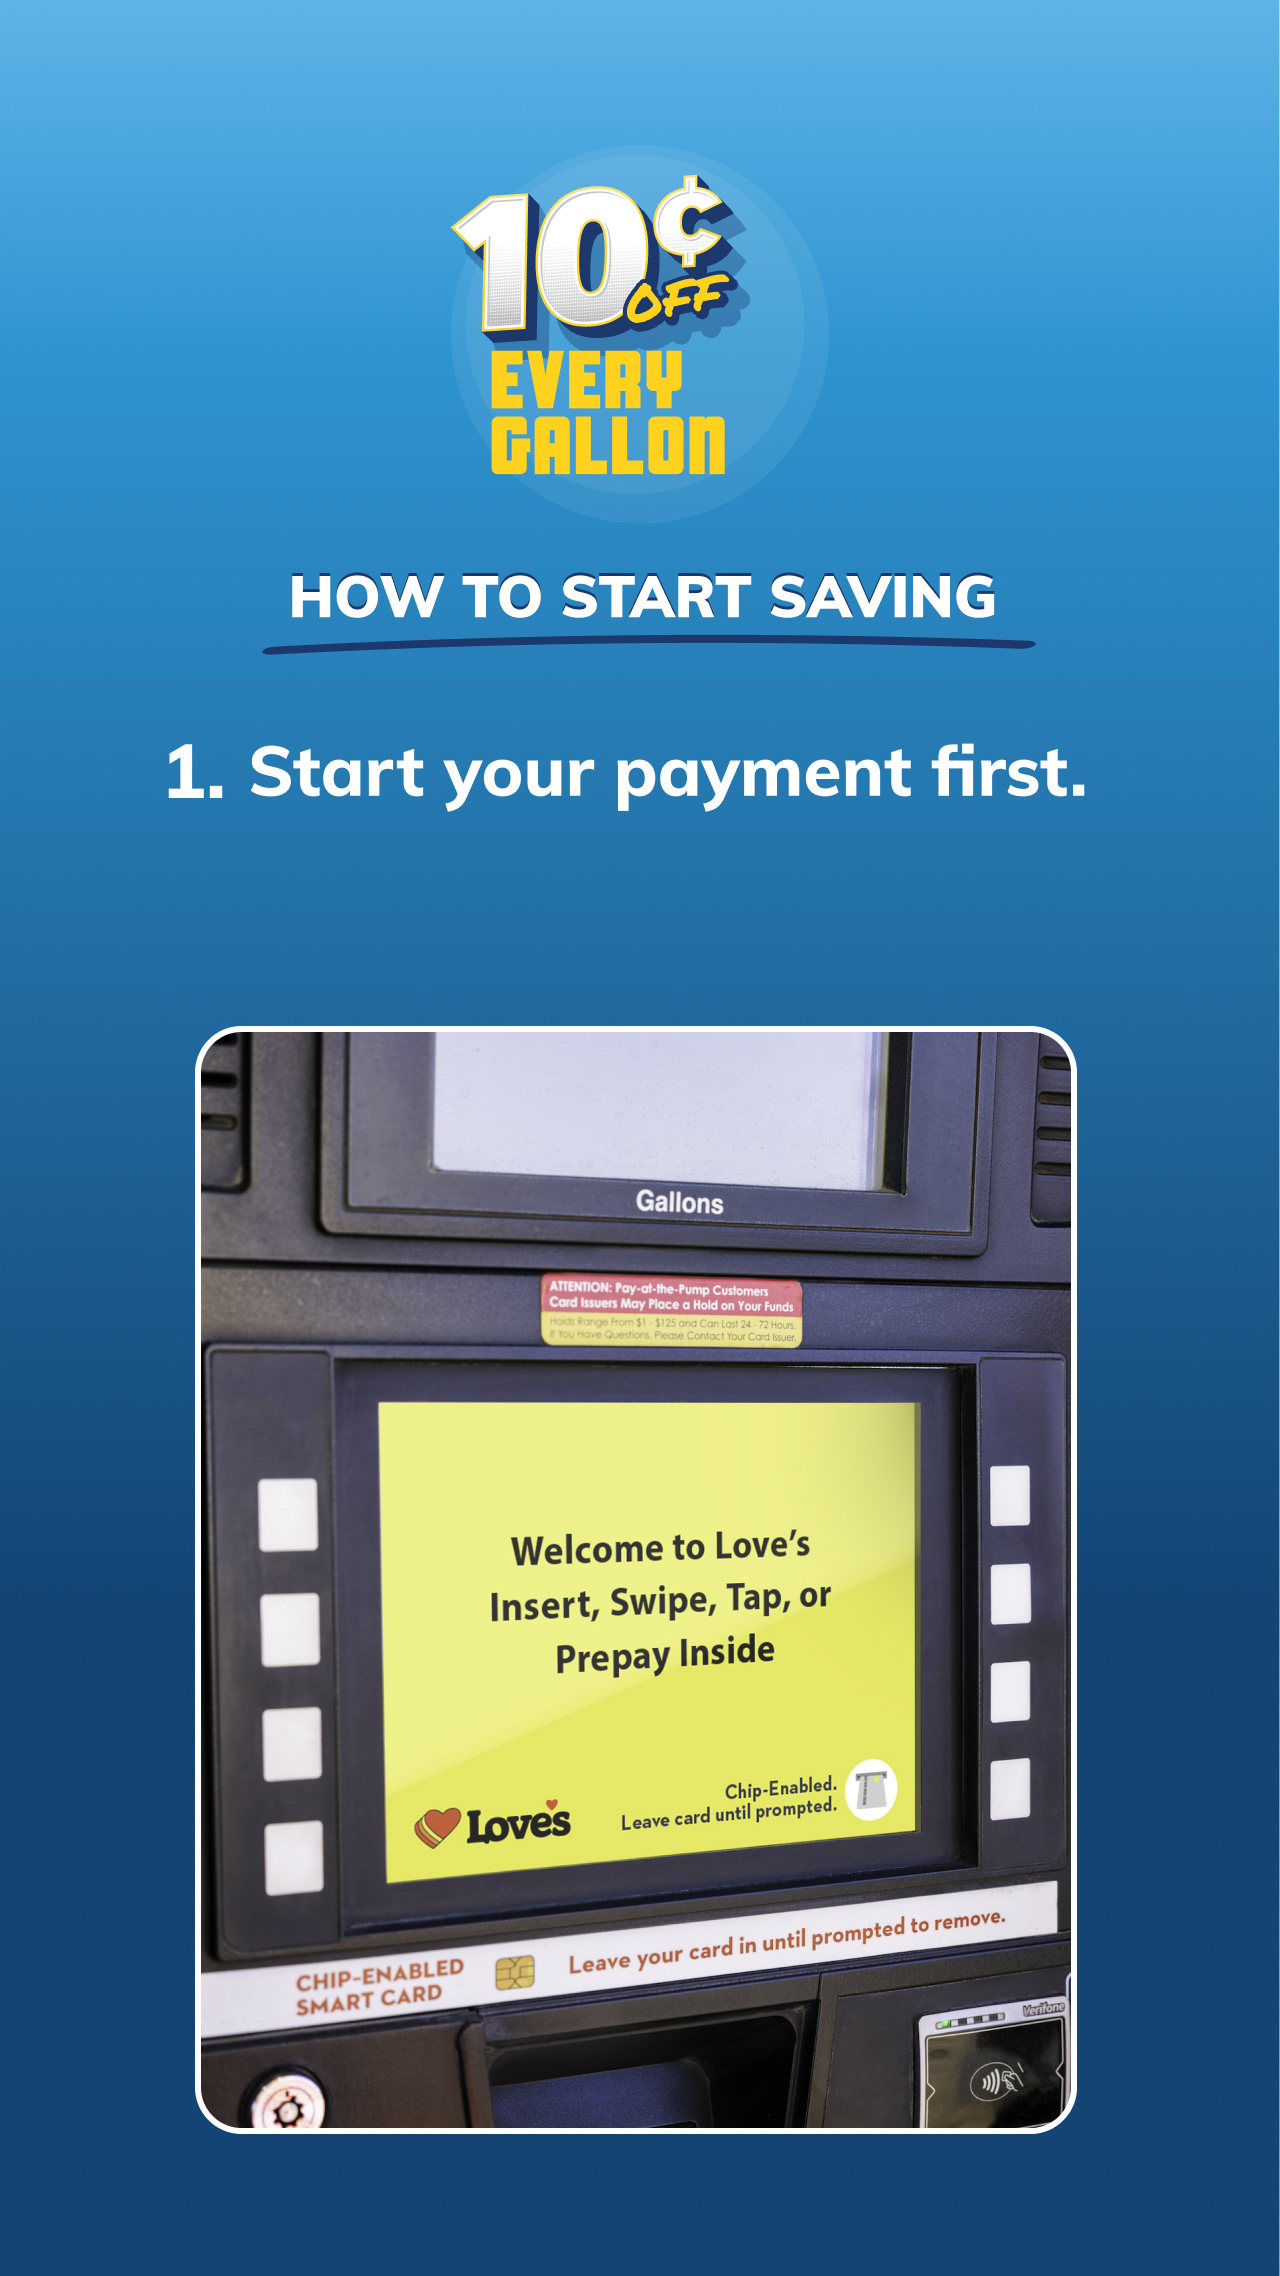 Find Locations & Pay At The Pump With Love's Connect